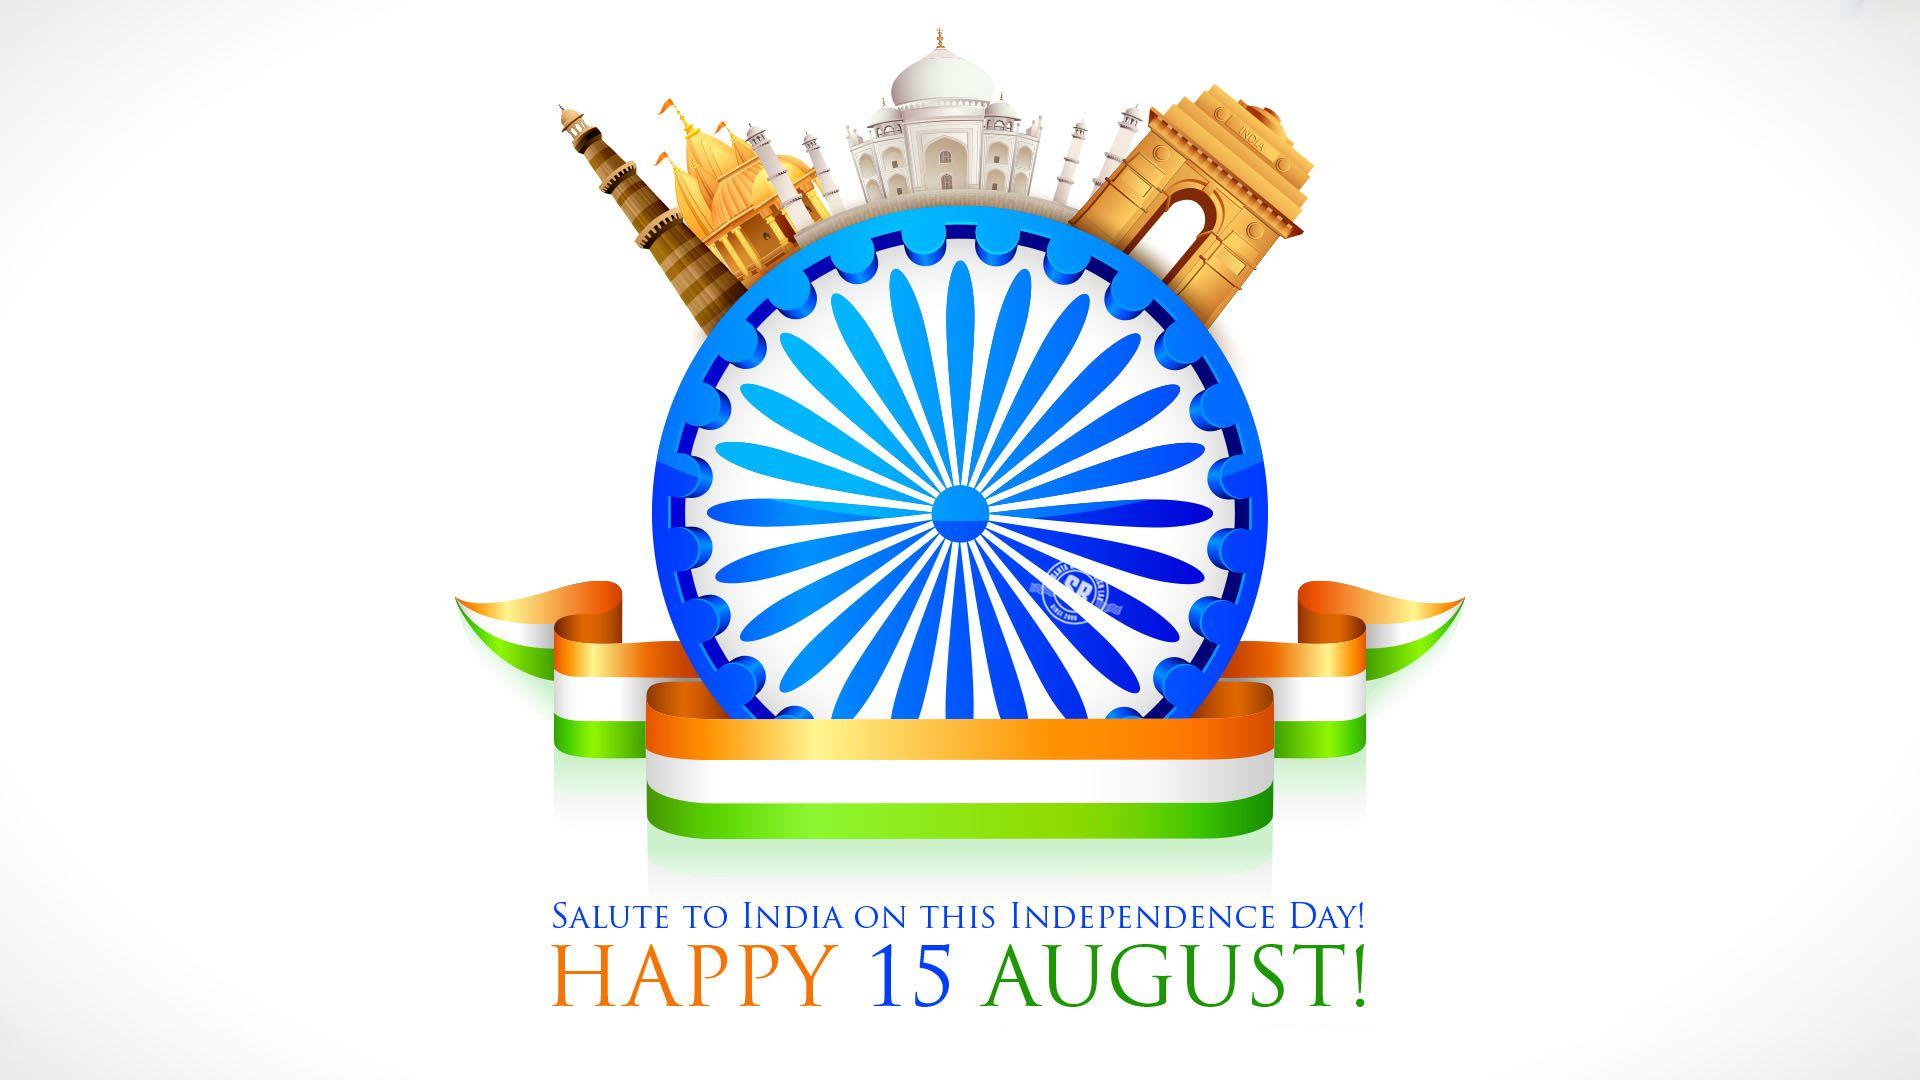 Happy 15 August Picture. Newhdpics. Independence day india